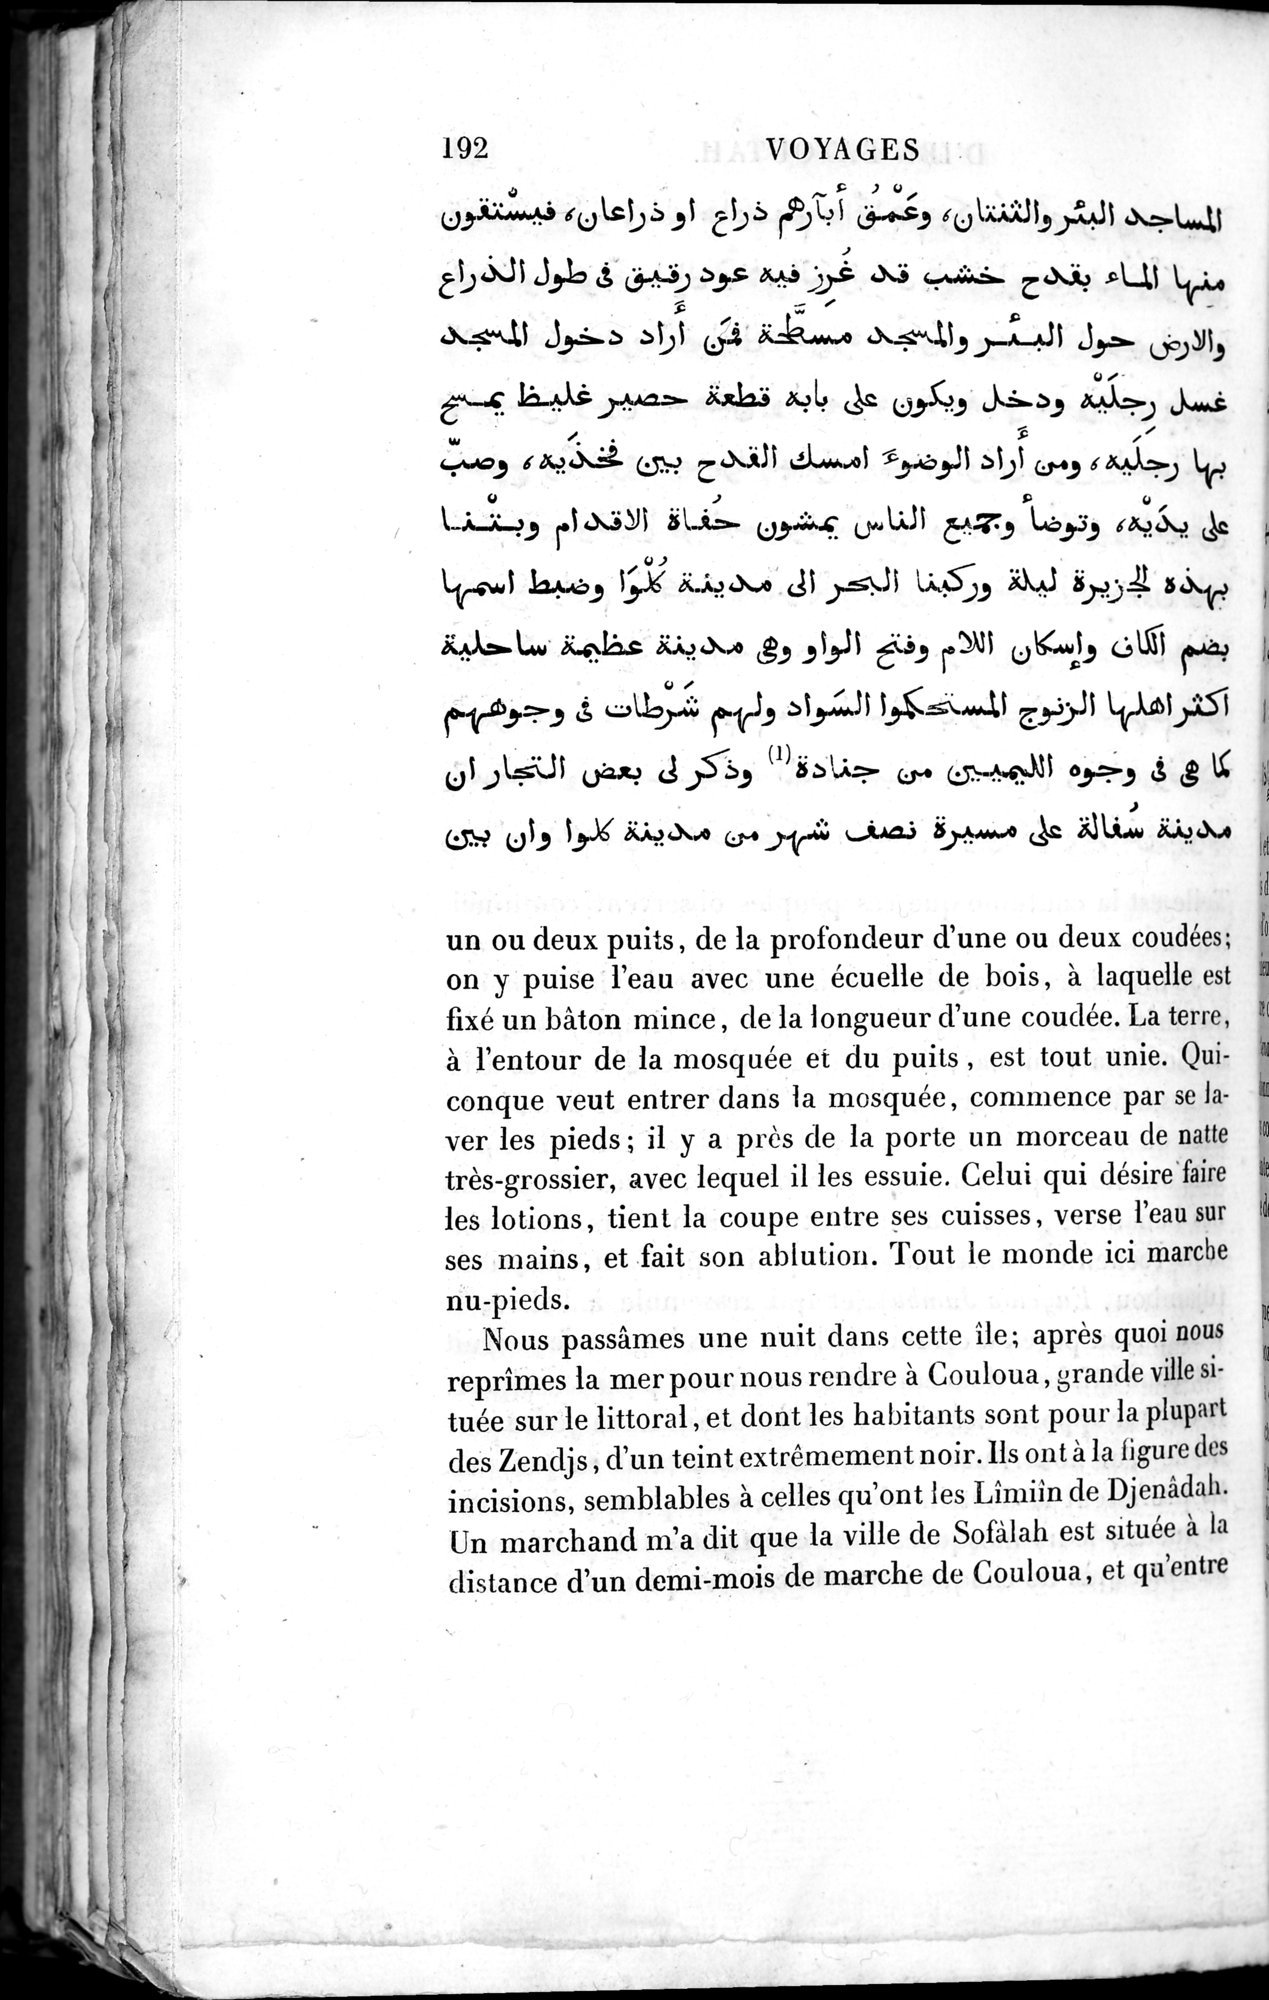 Voyages d'Ibn Batoutah : vol.2 / Page 220 (Grayscale High Resolution Image)